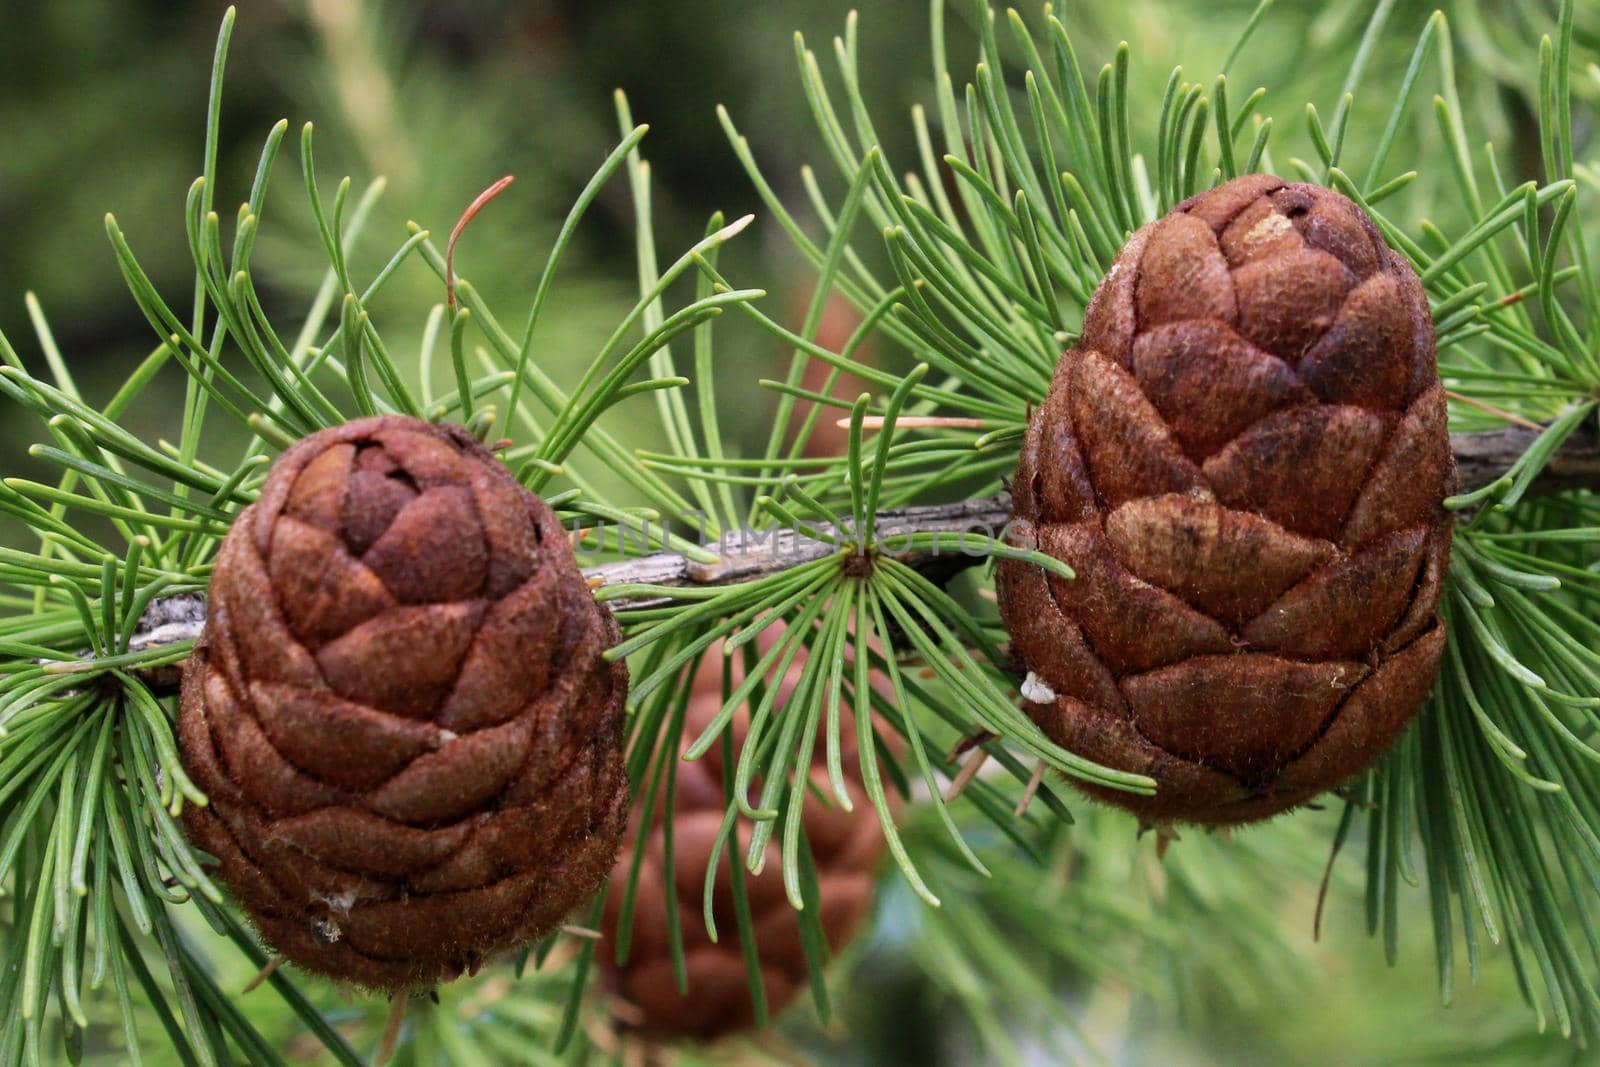 Pine cones close-up on a branch with green pine needles. Natural background.